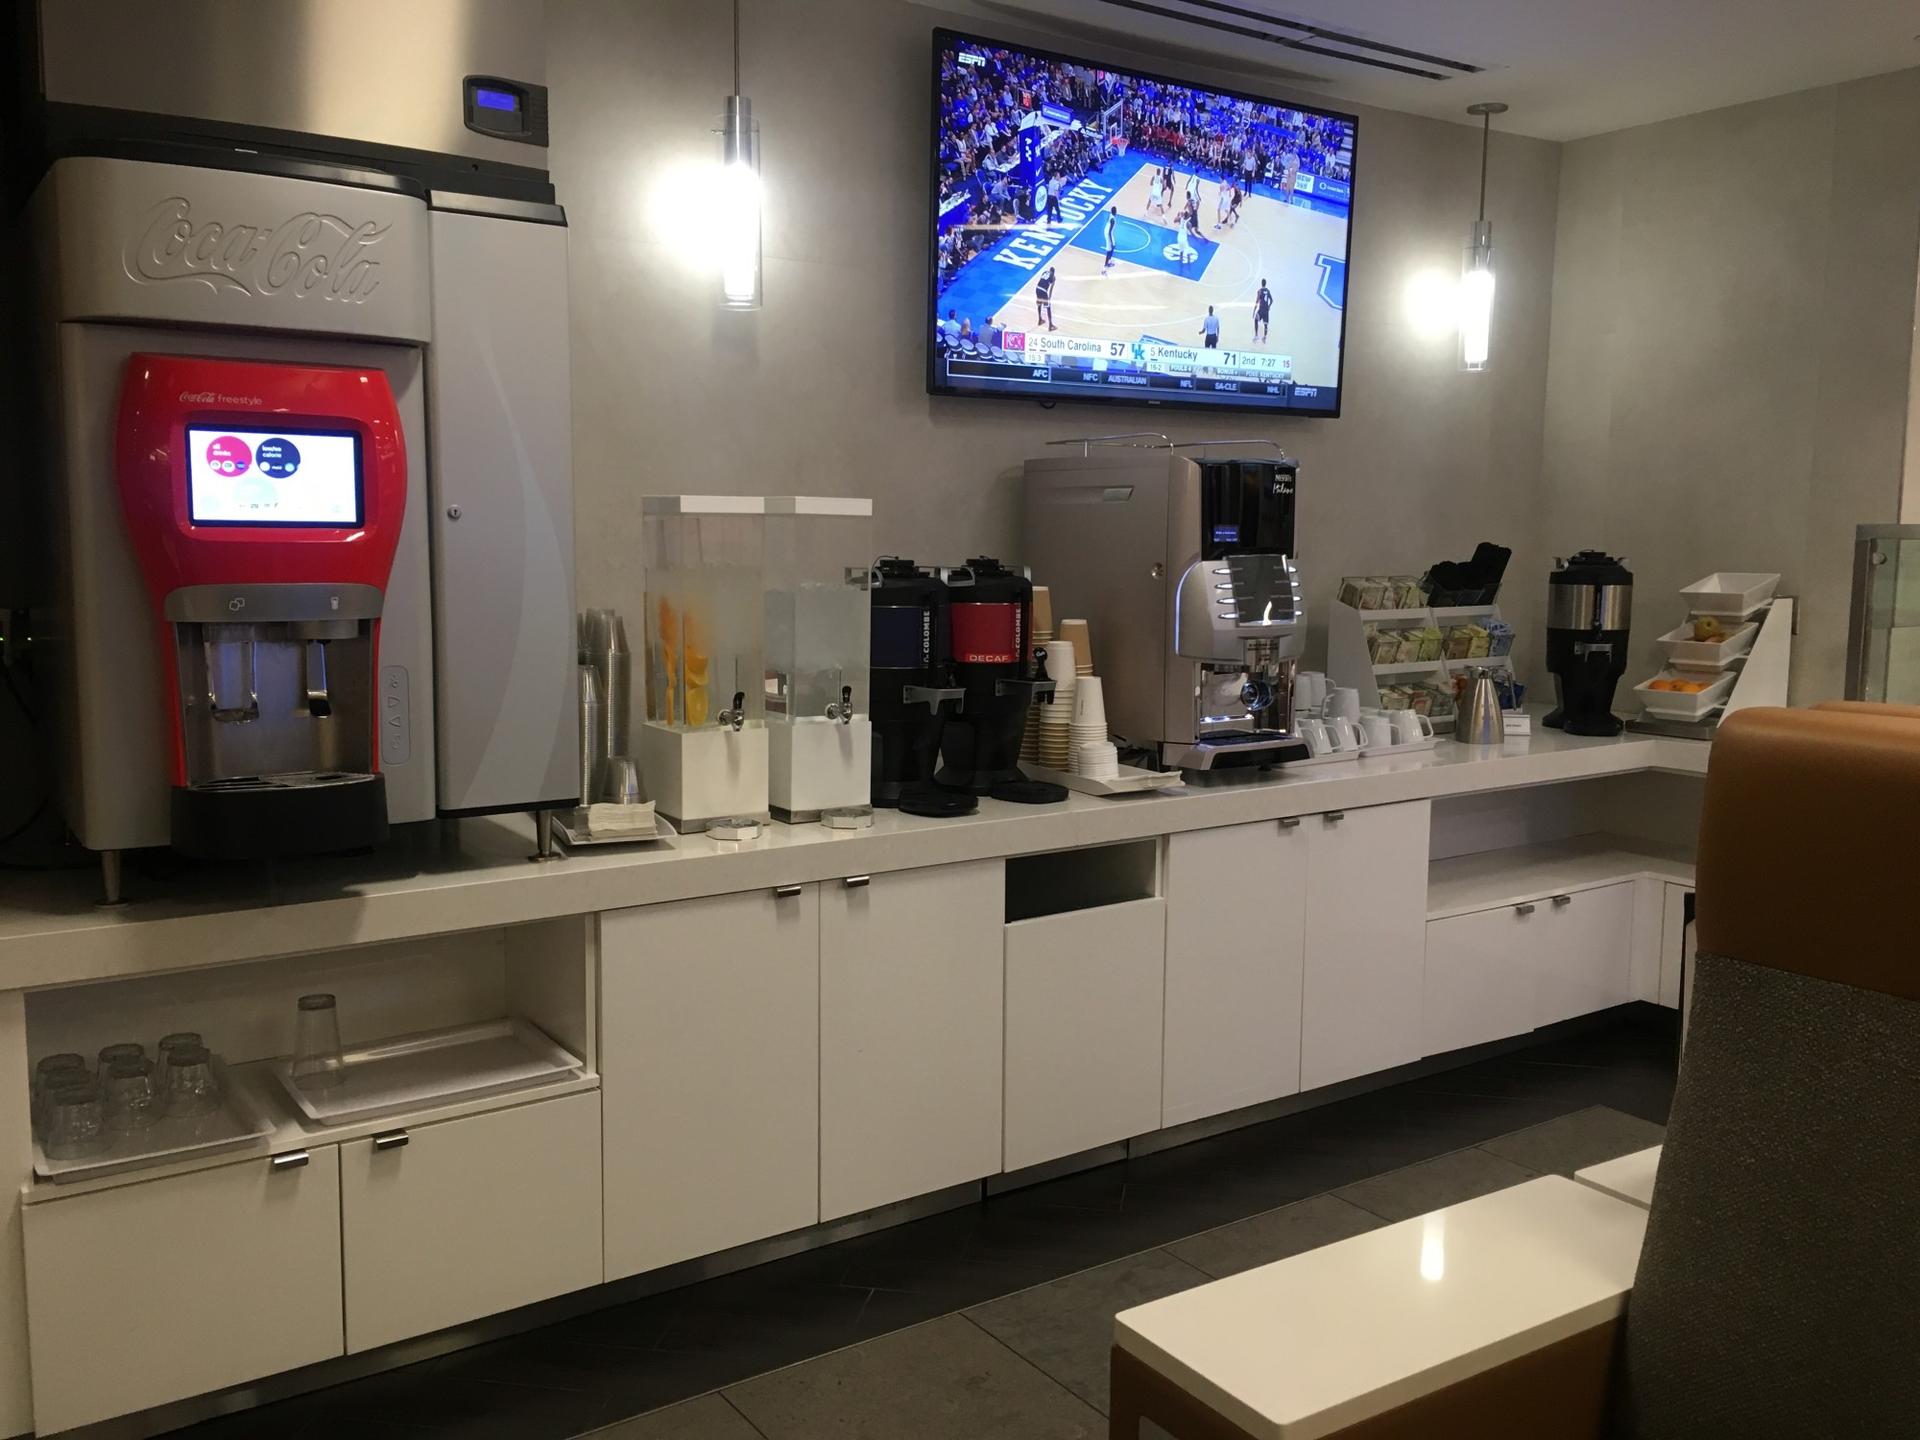 American Airlines Admirals Club (Gate A7) image 20 of 25